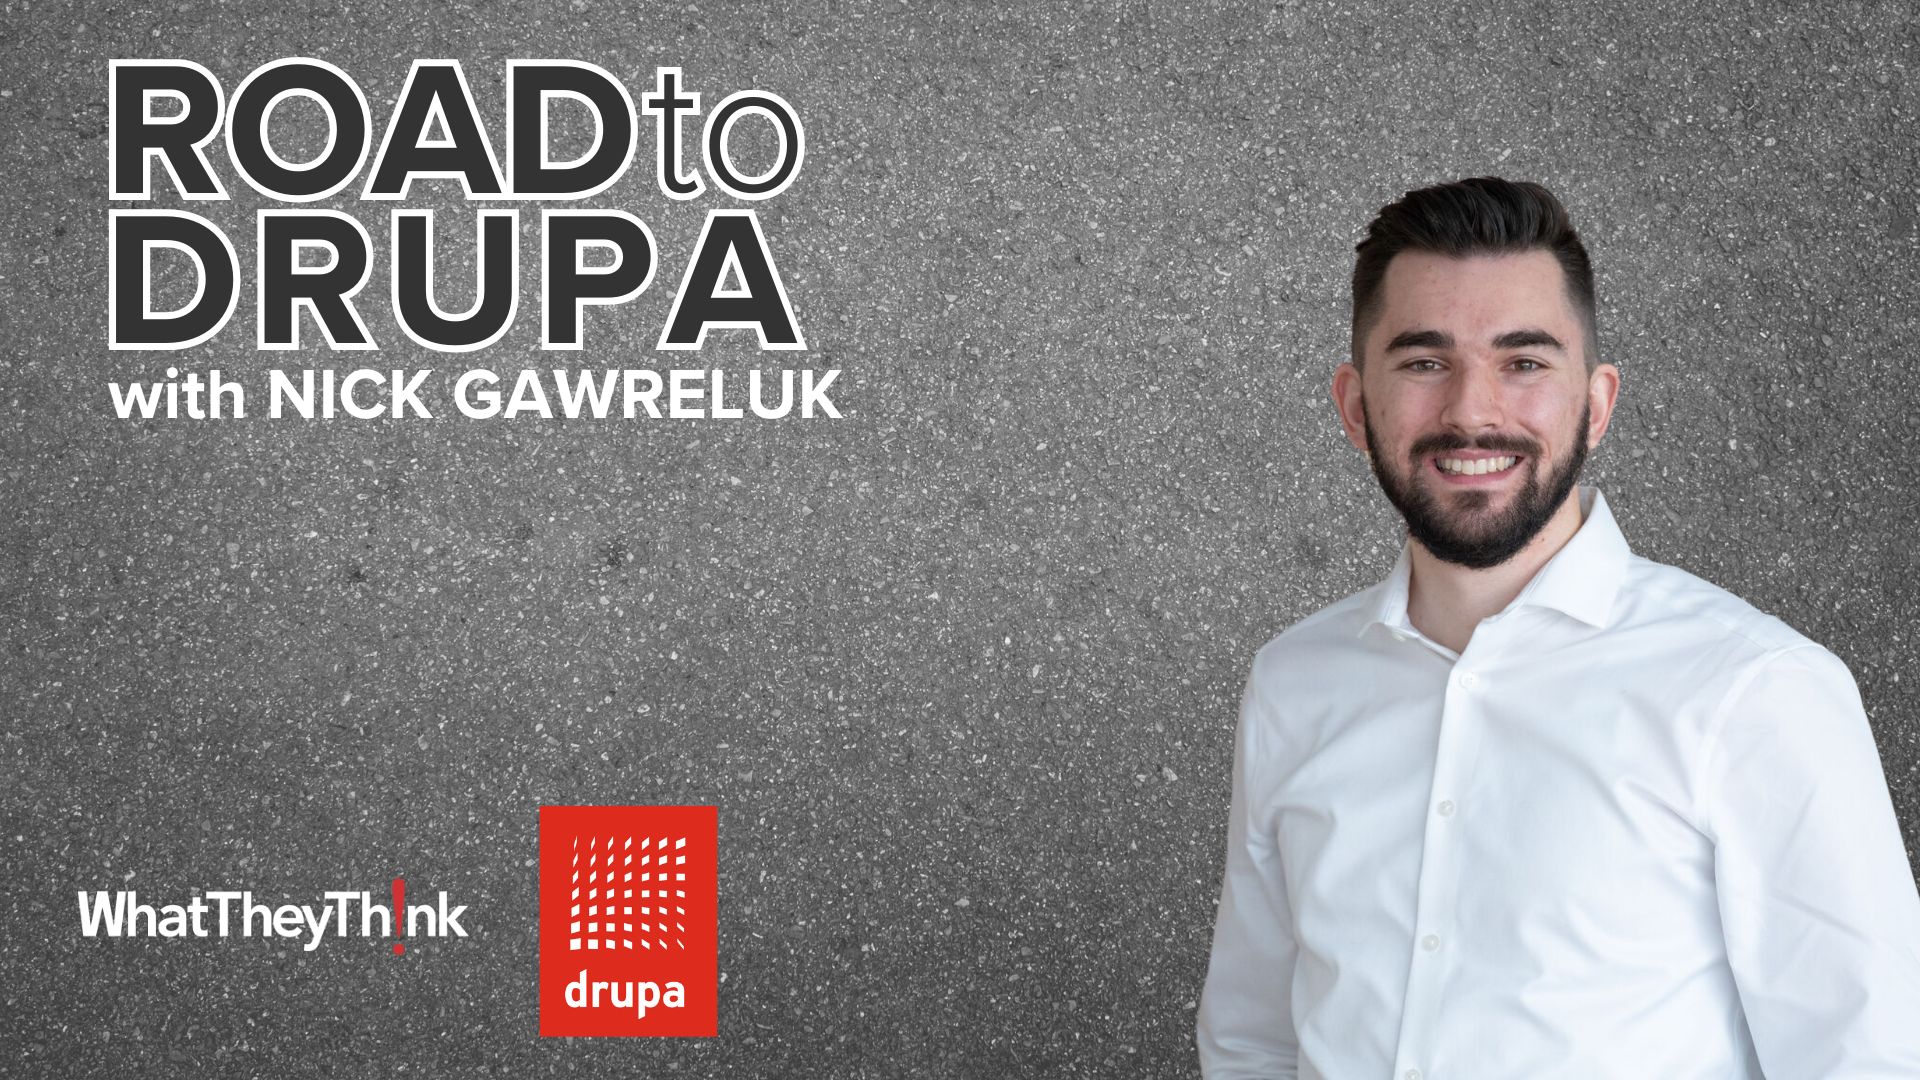 Video preview: Nick Gawreluk’s Personal Road to drupa